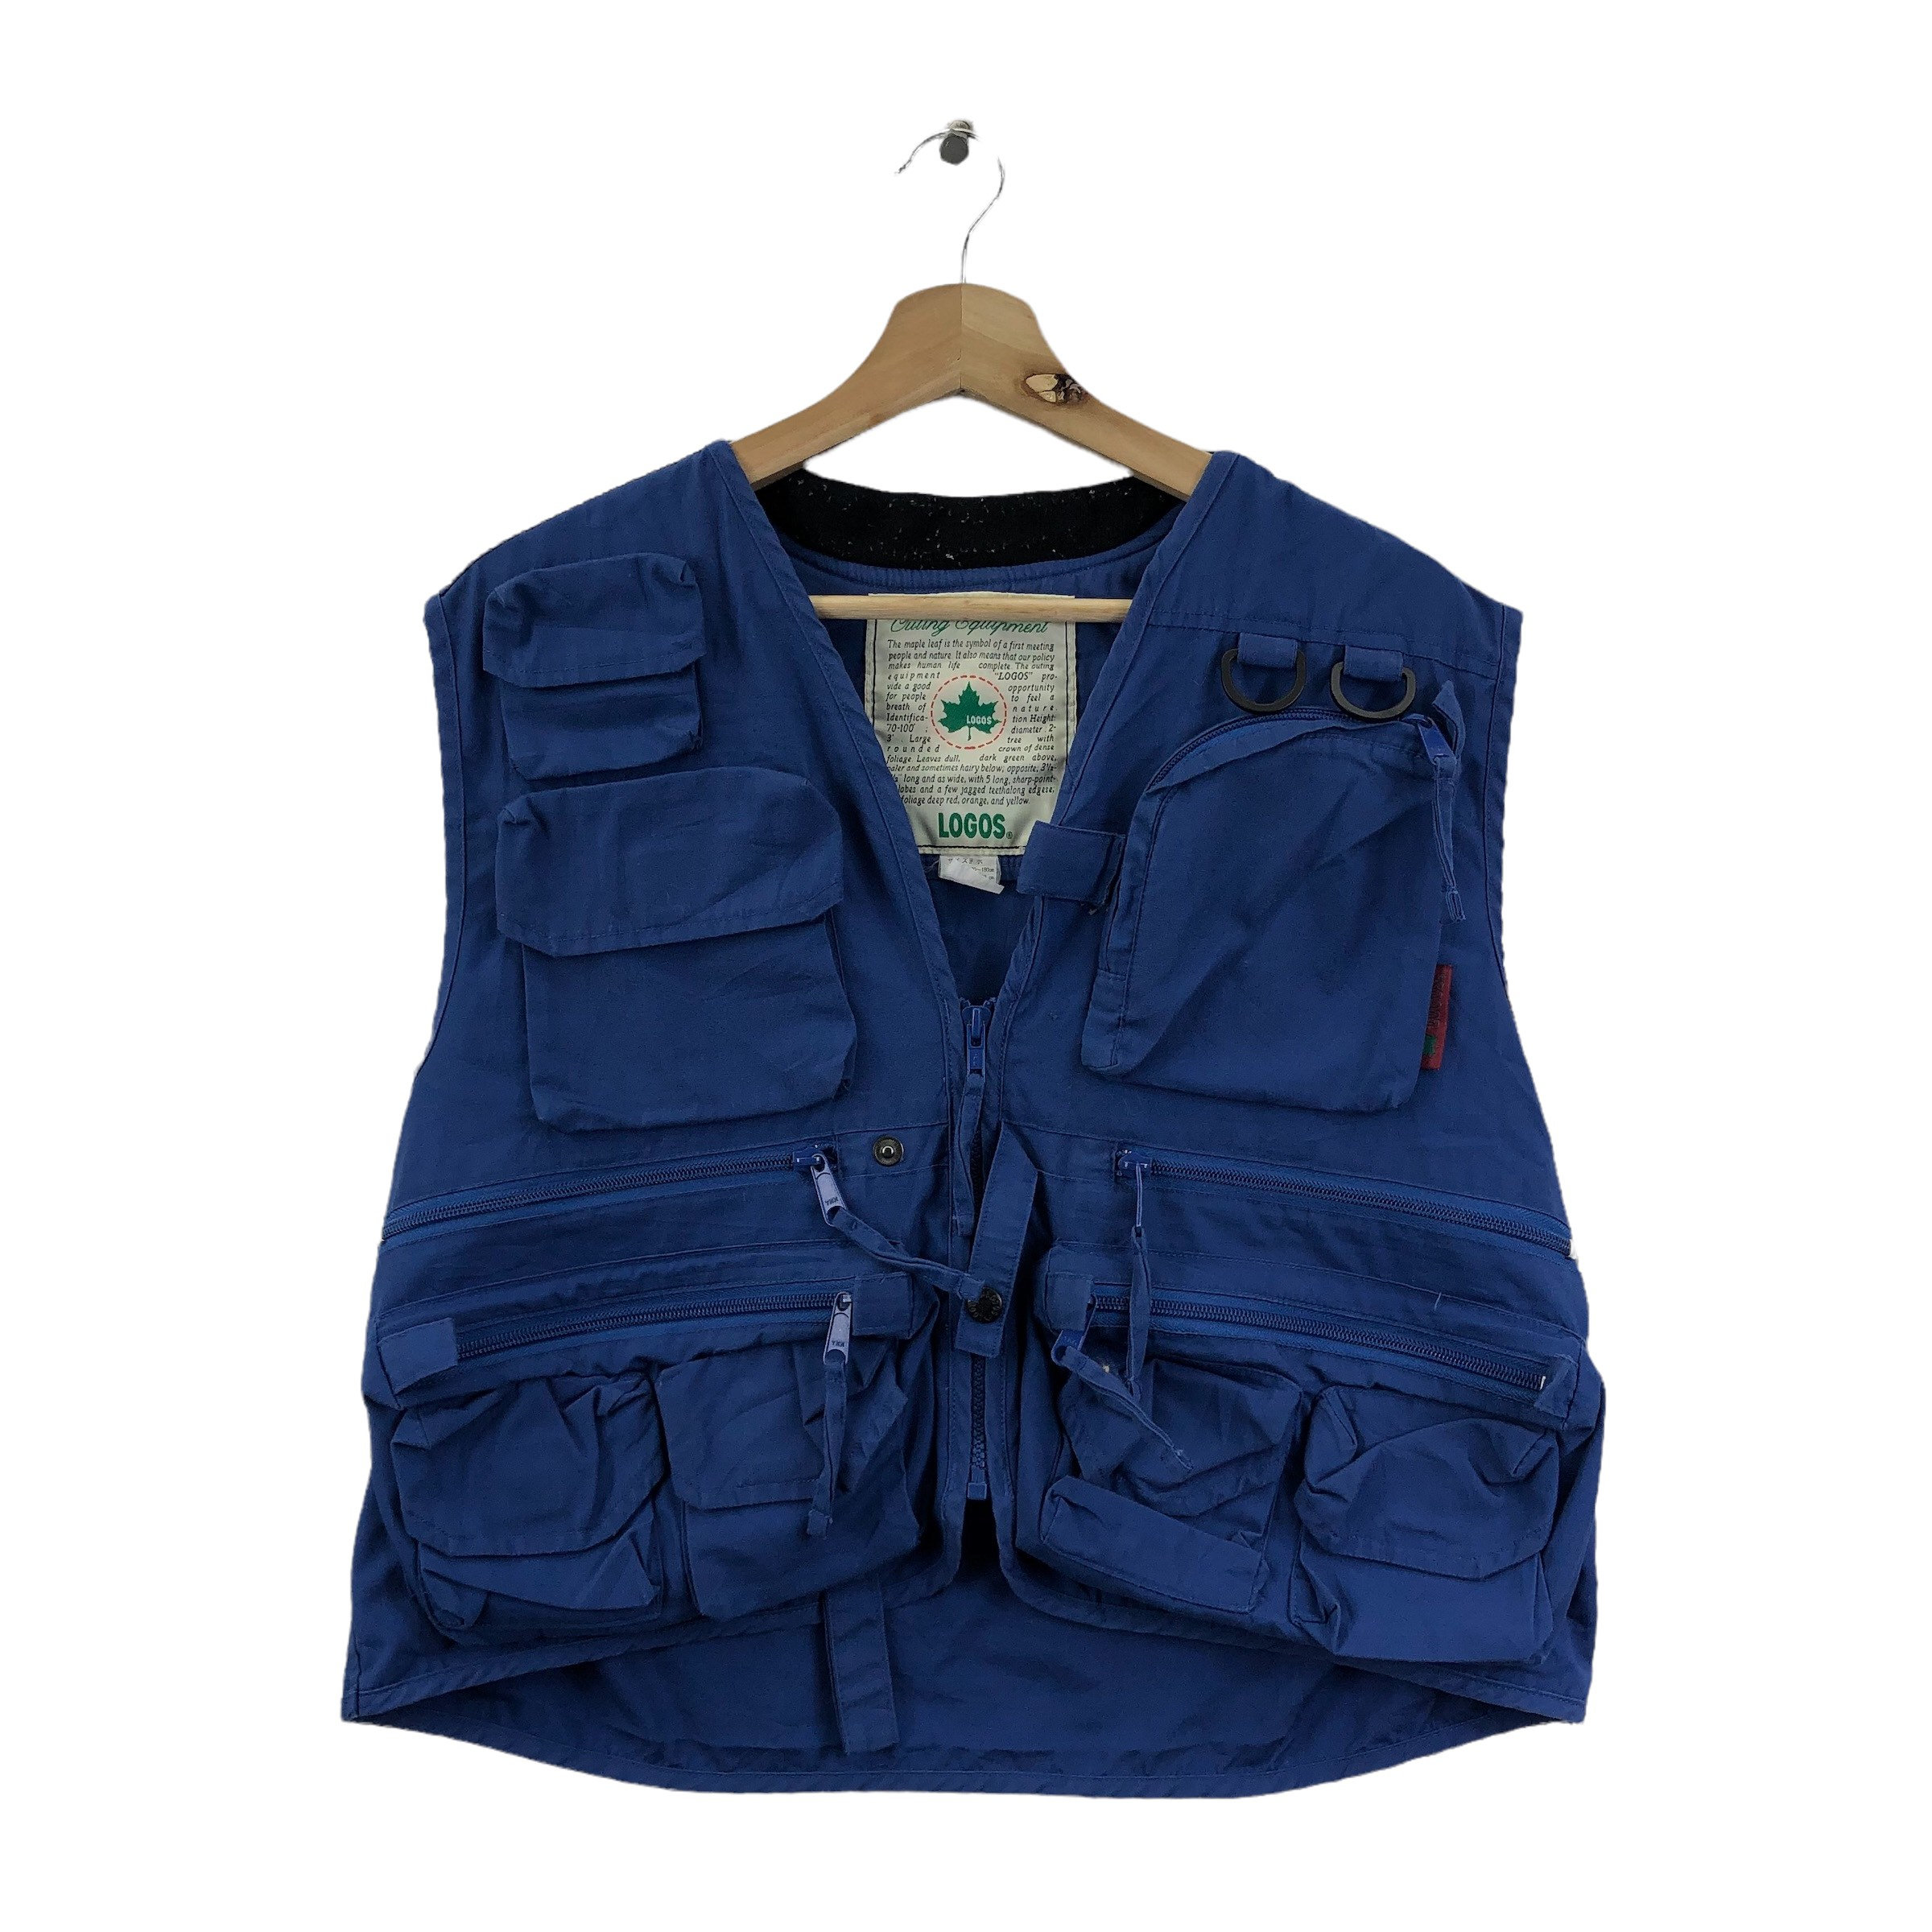 Vintage LOGOS OUTING EQUIPMENT Multipocket Vest Fishing -  India